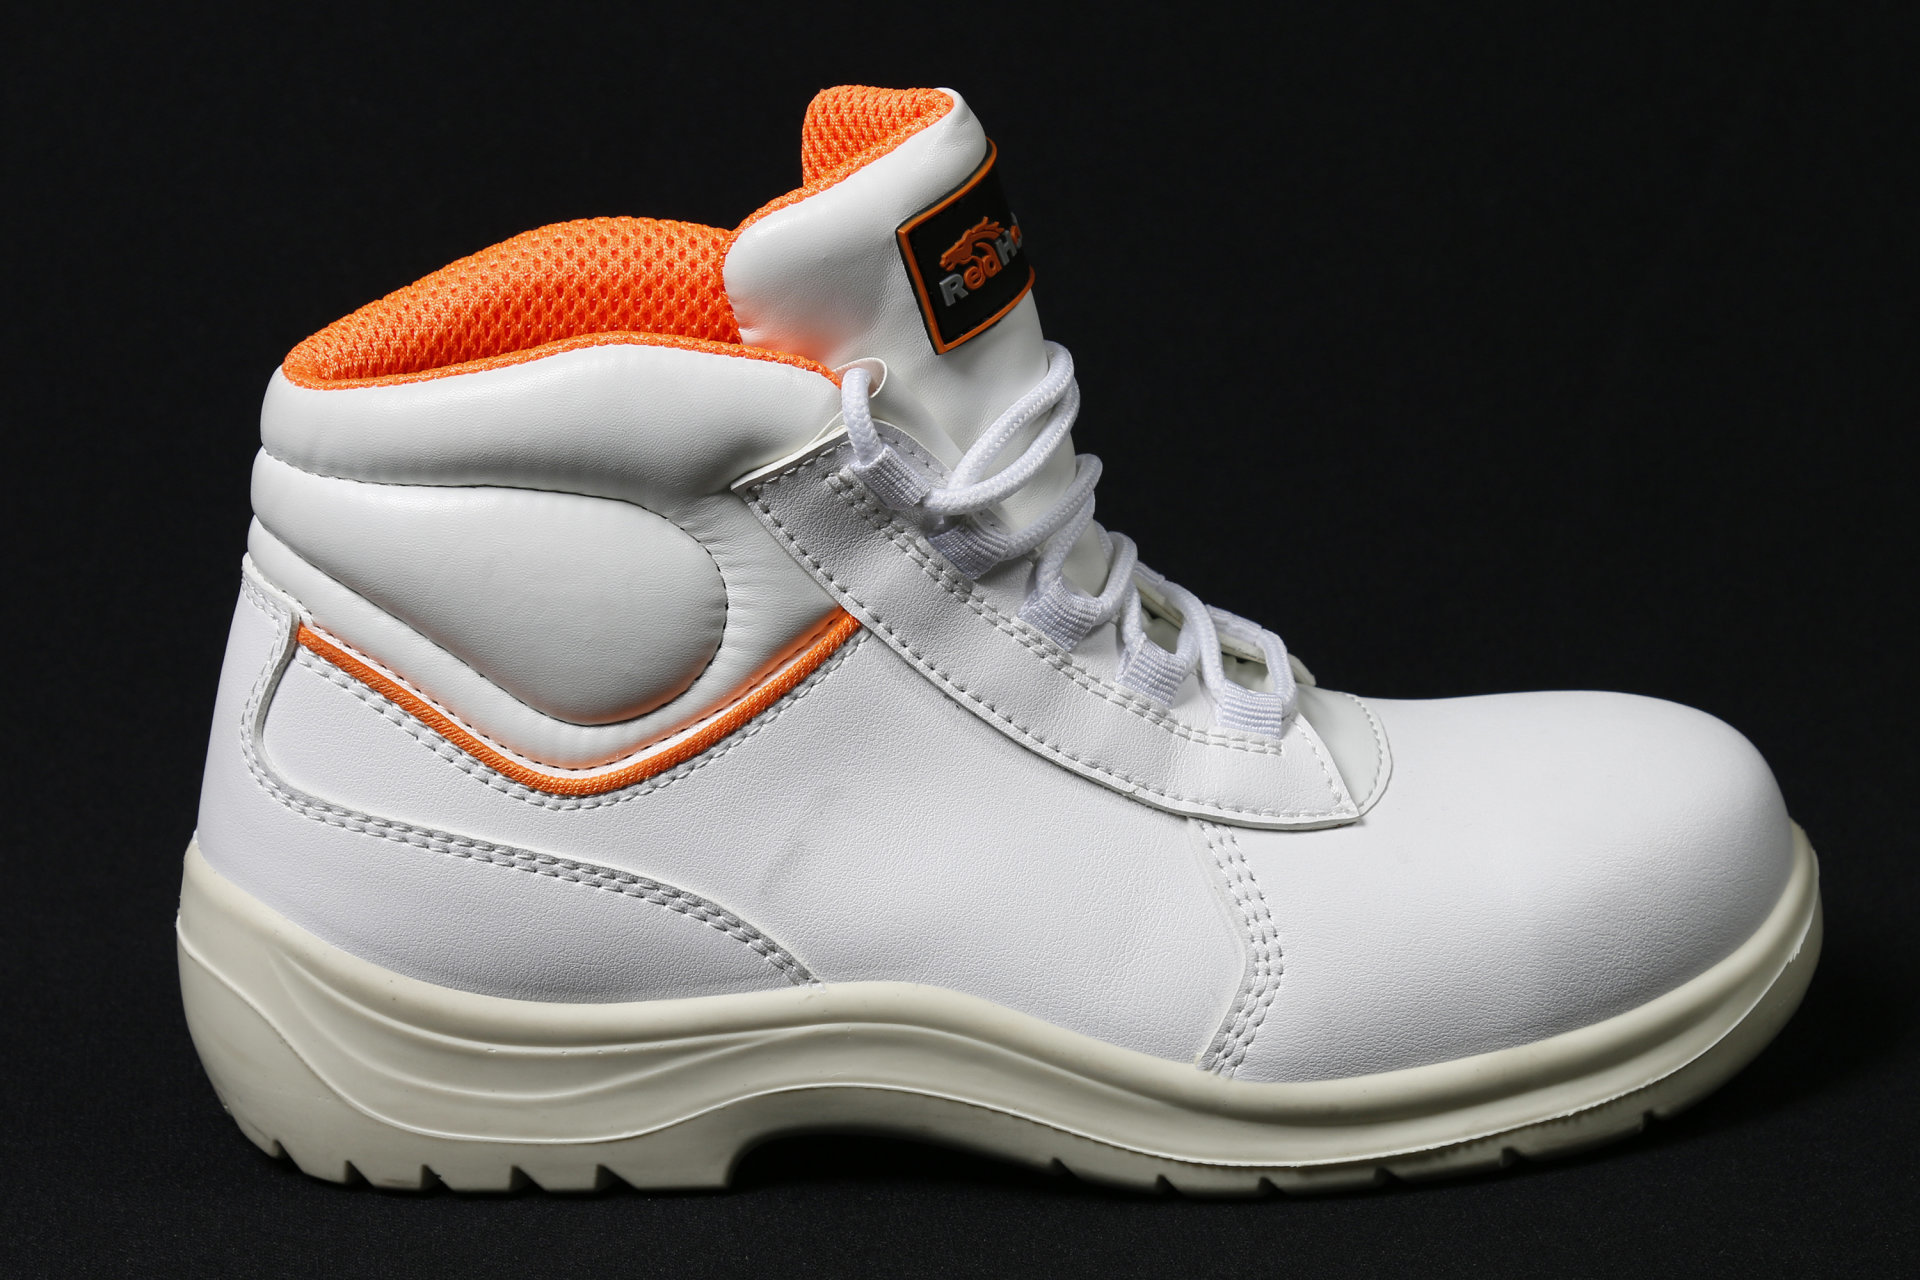 White safety shoes